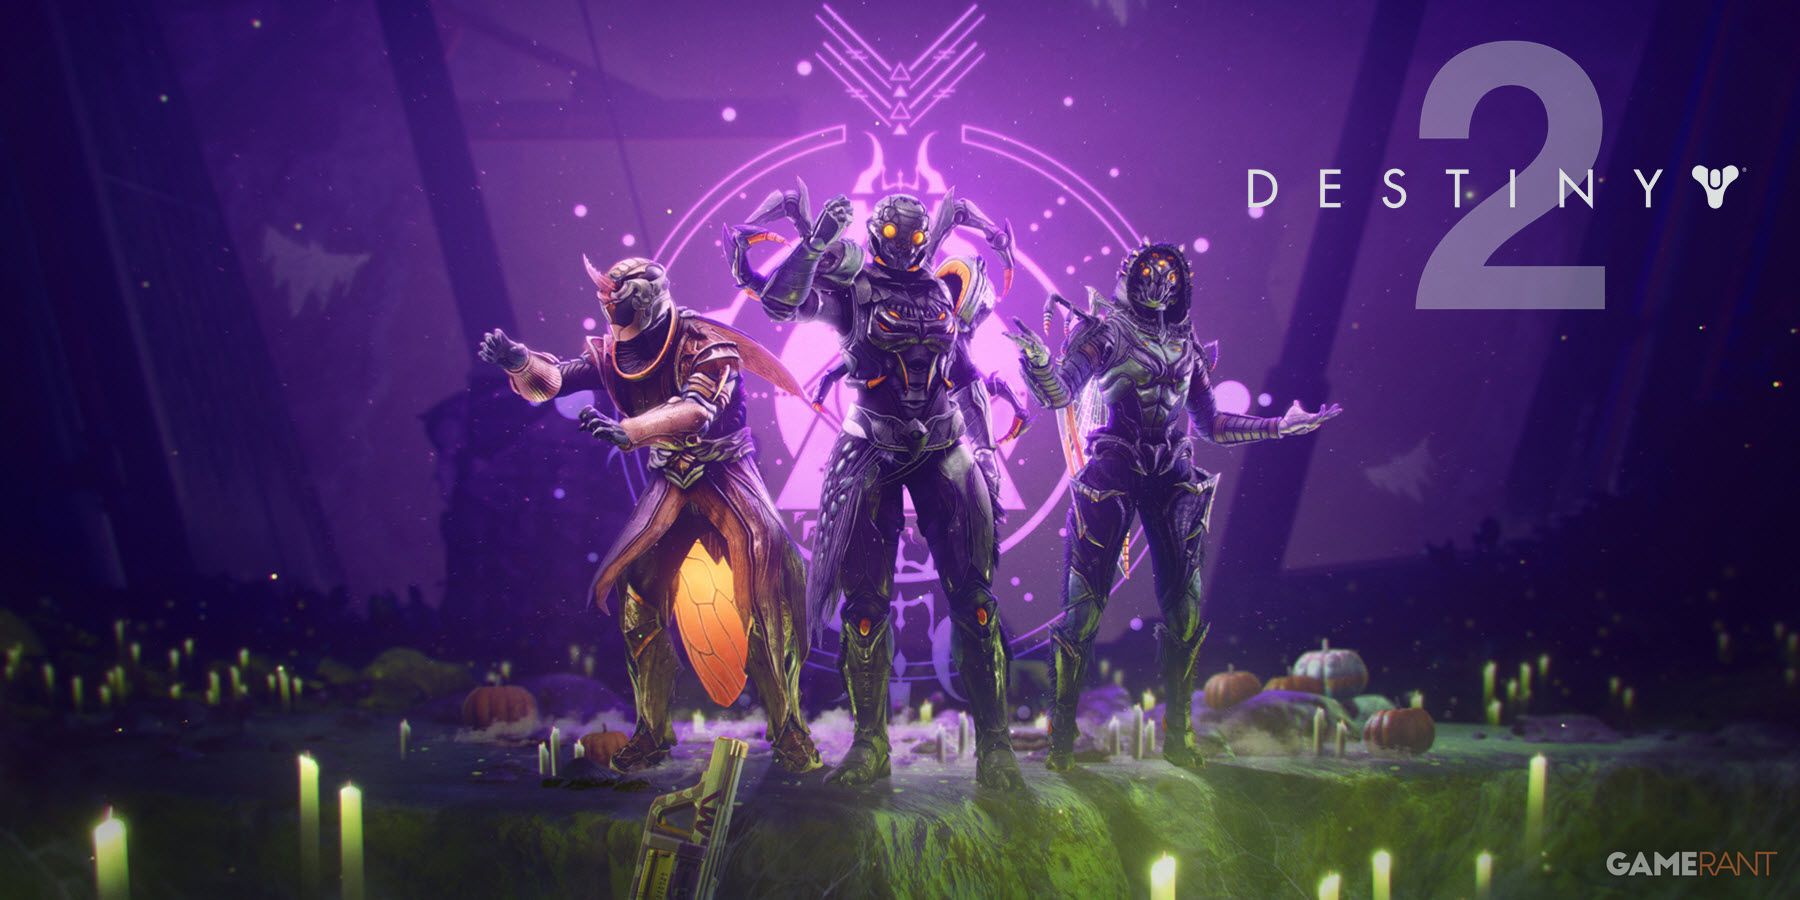 Destiny 2 Reveals New Festival of the Lost Rewards and Gear